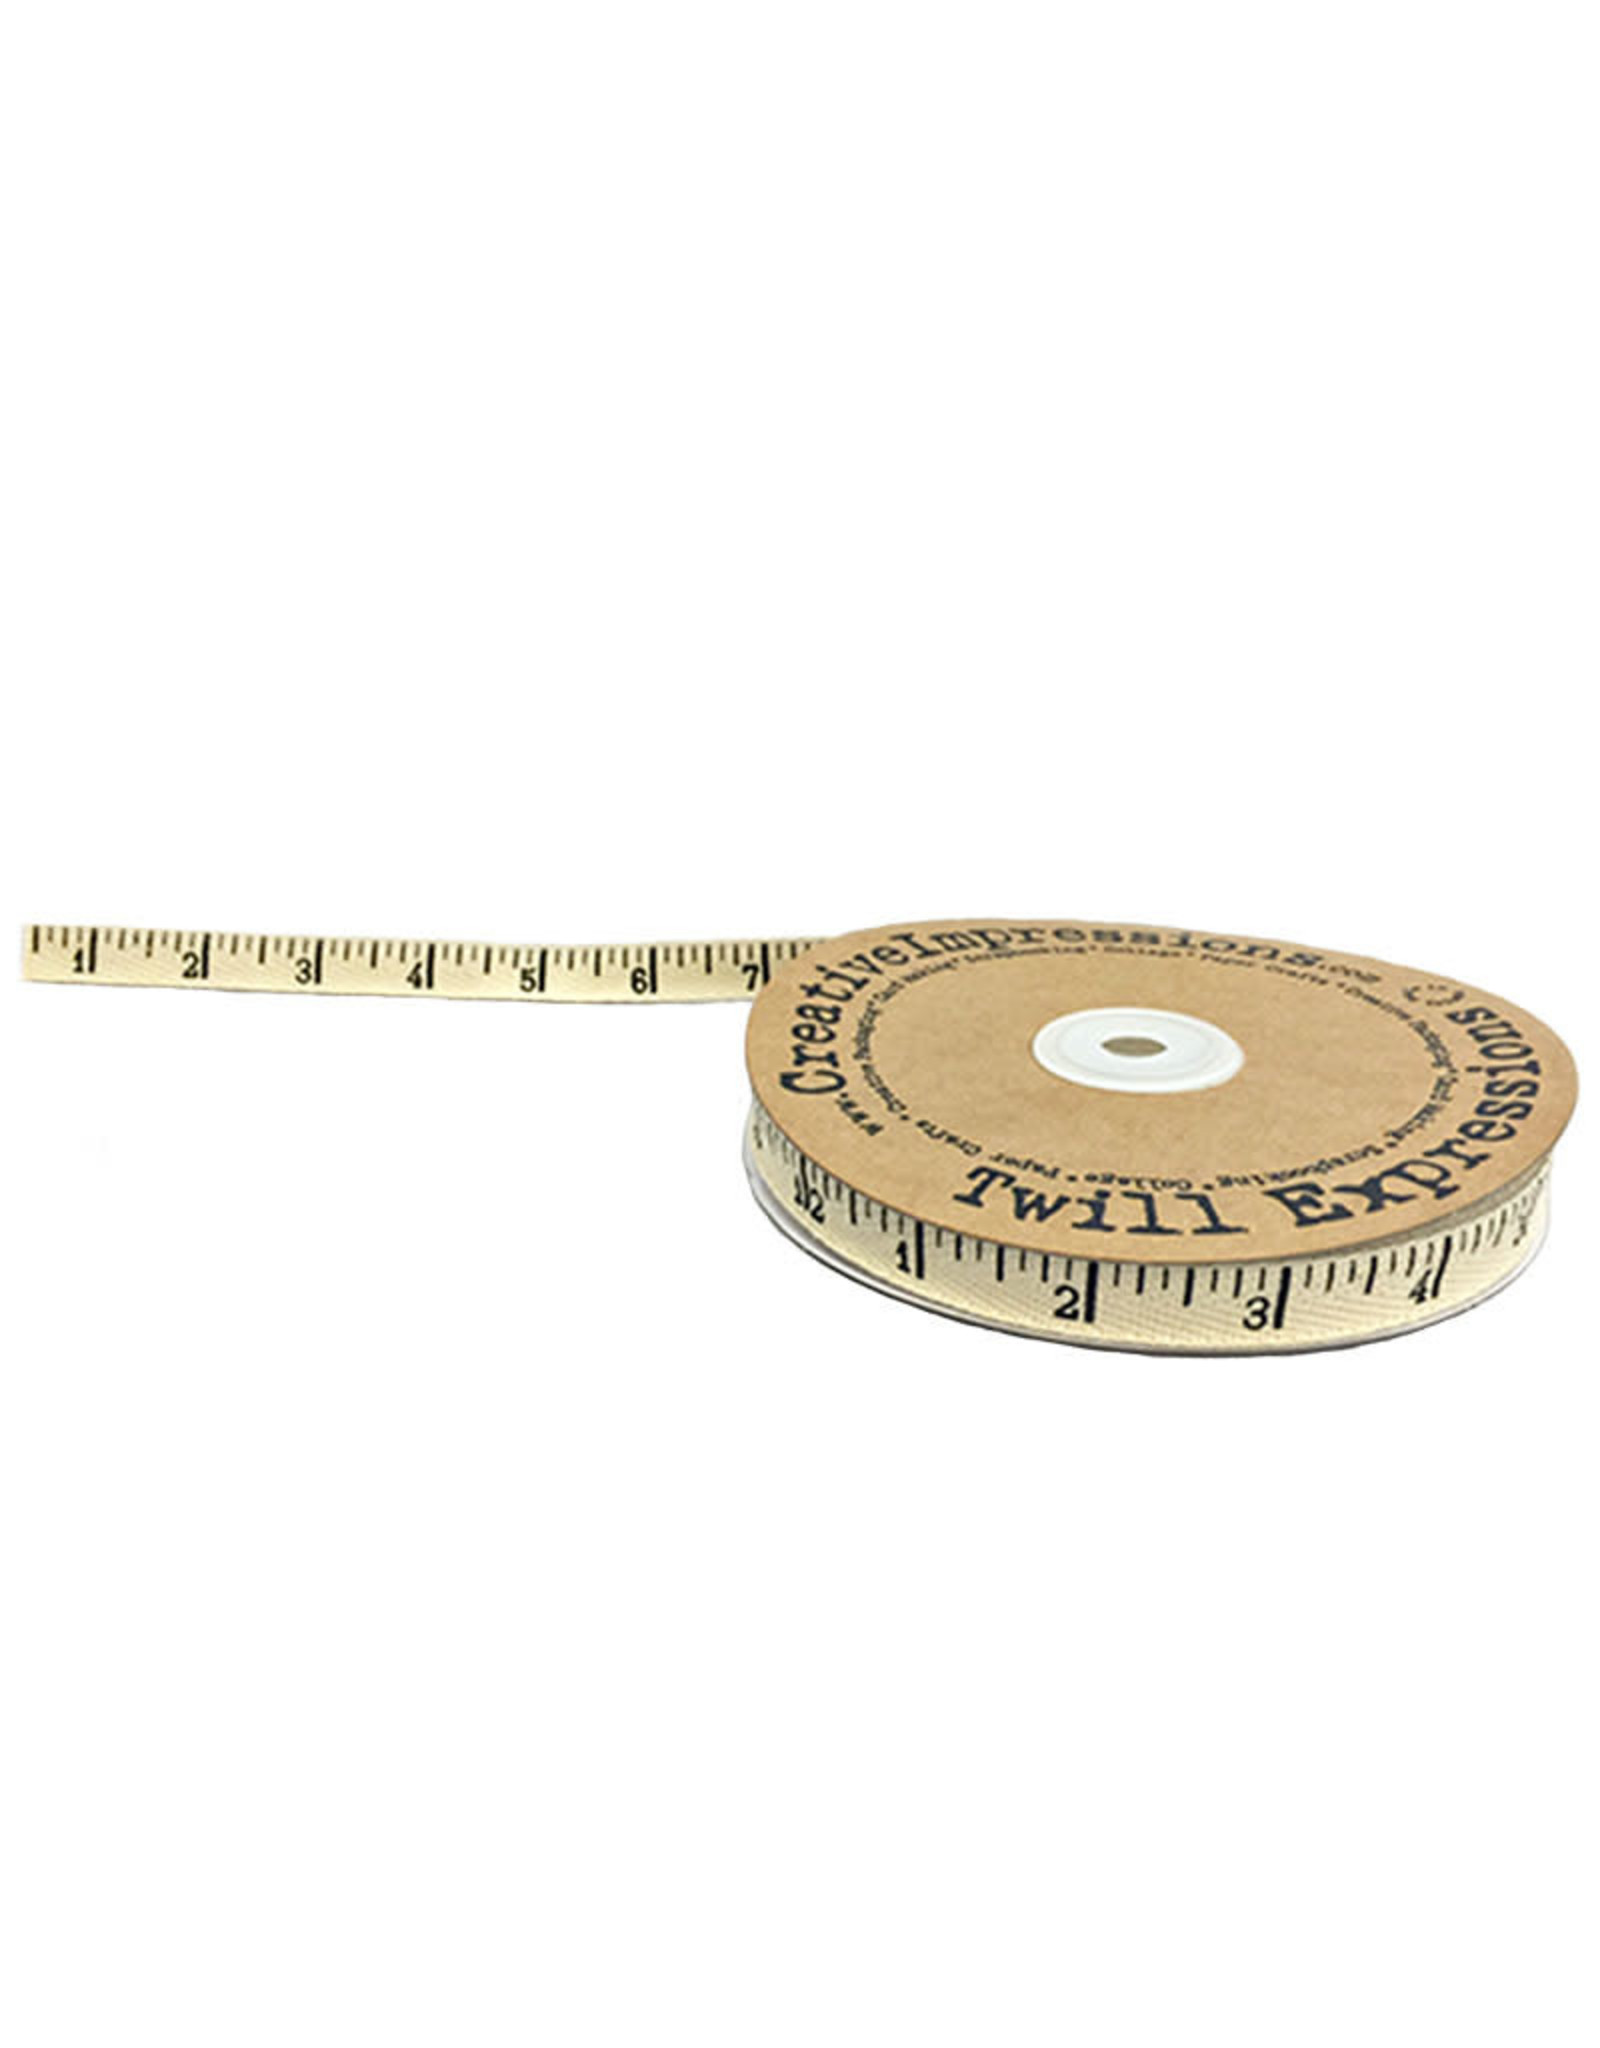 Creative Impressions Antique Ruler Twill Tape, Natural, by the Yard, 1/2 inch wide